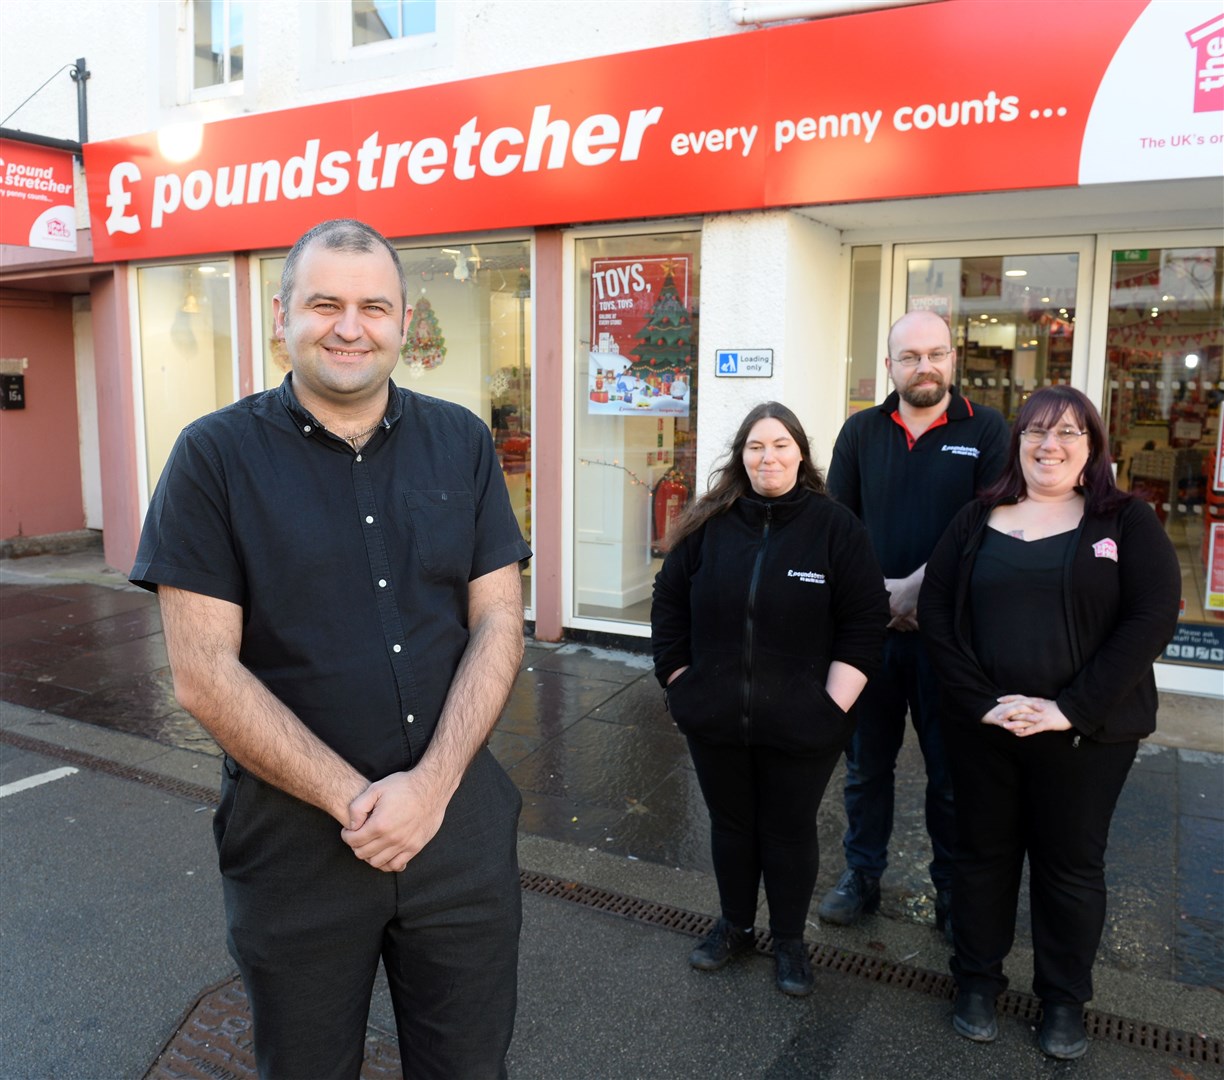 Poundstrecher on Dingwall High Street in the former New Look shop. Area manager Gary McNamee with staff. Picture Gary Anthony